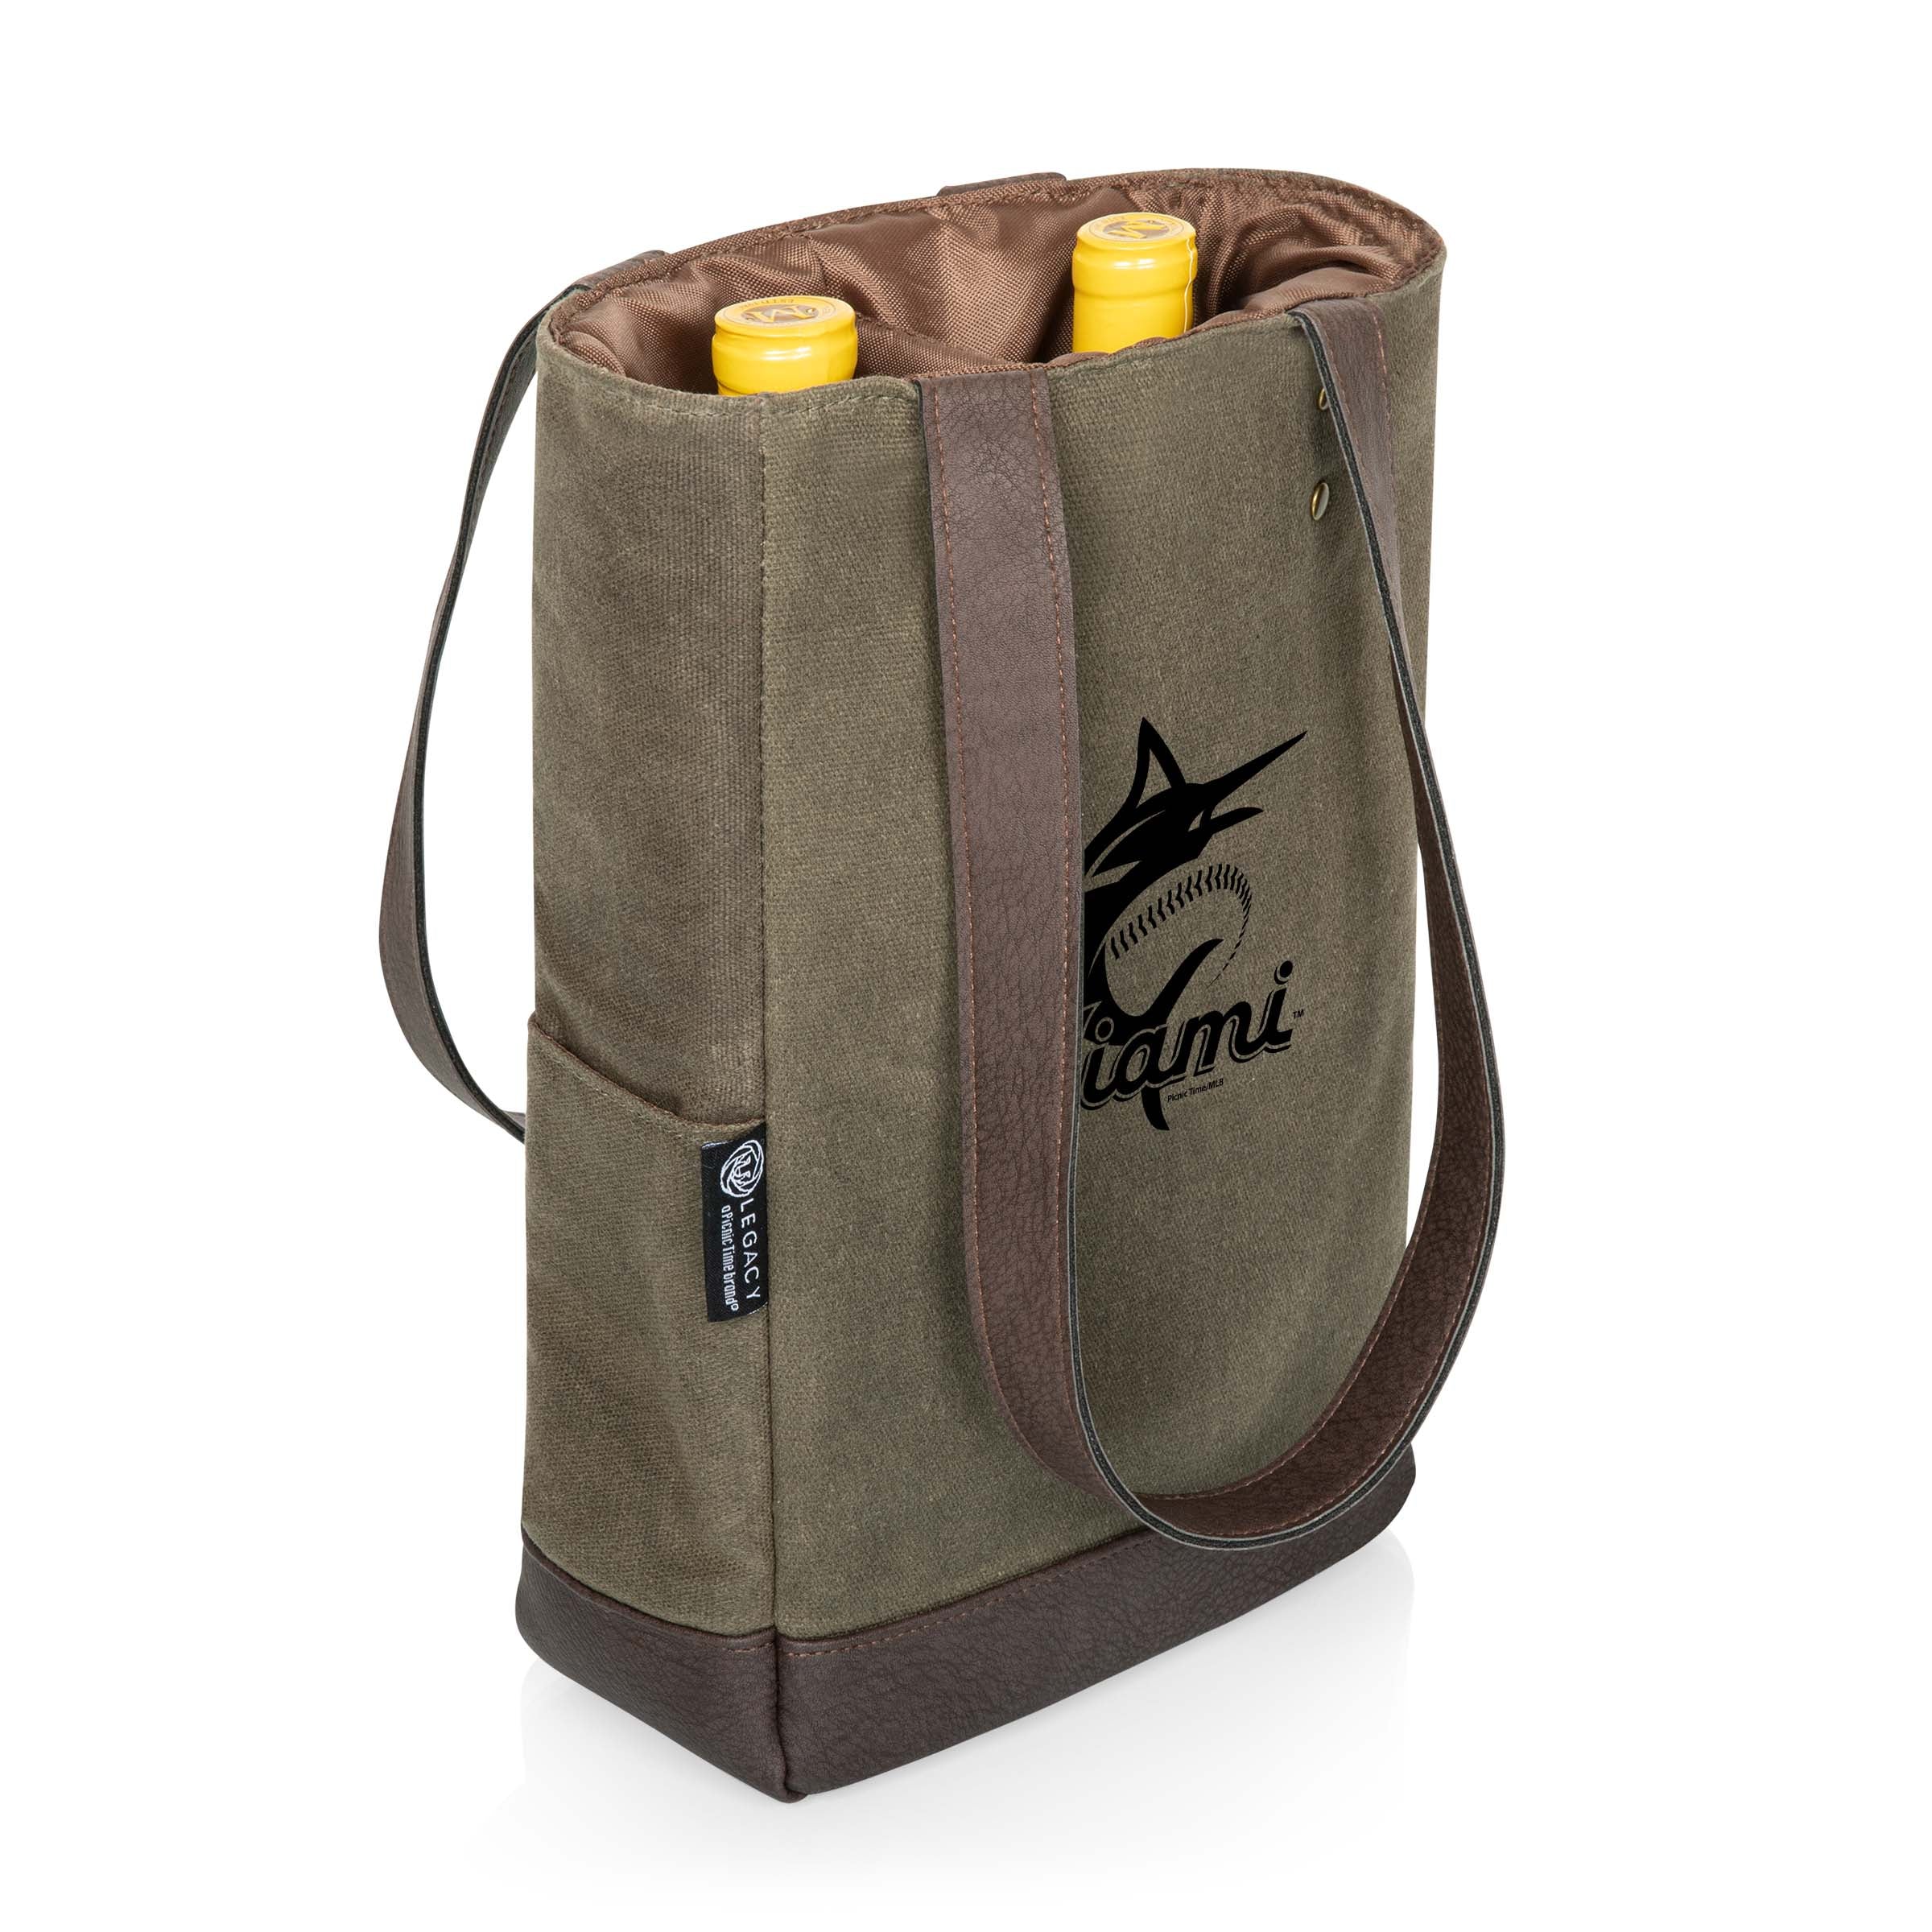 Miami Marlins - 2 Bottle Insulated Wine Cooler Bag